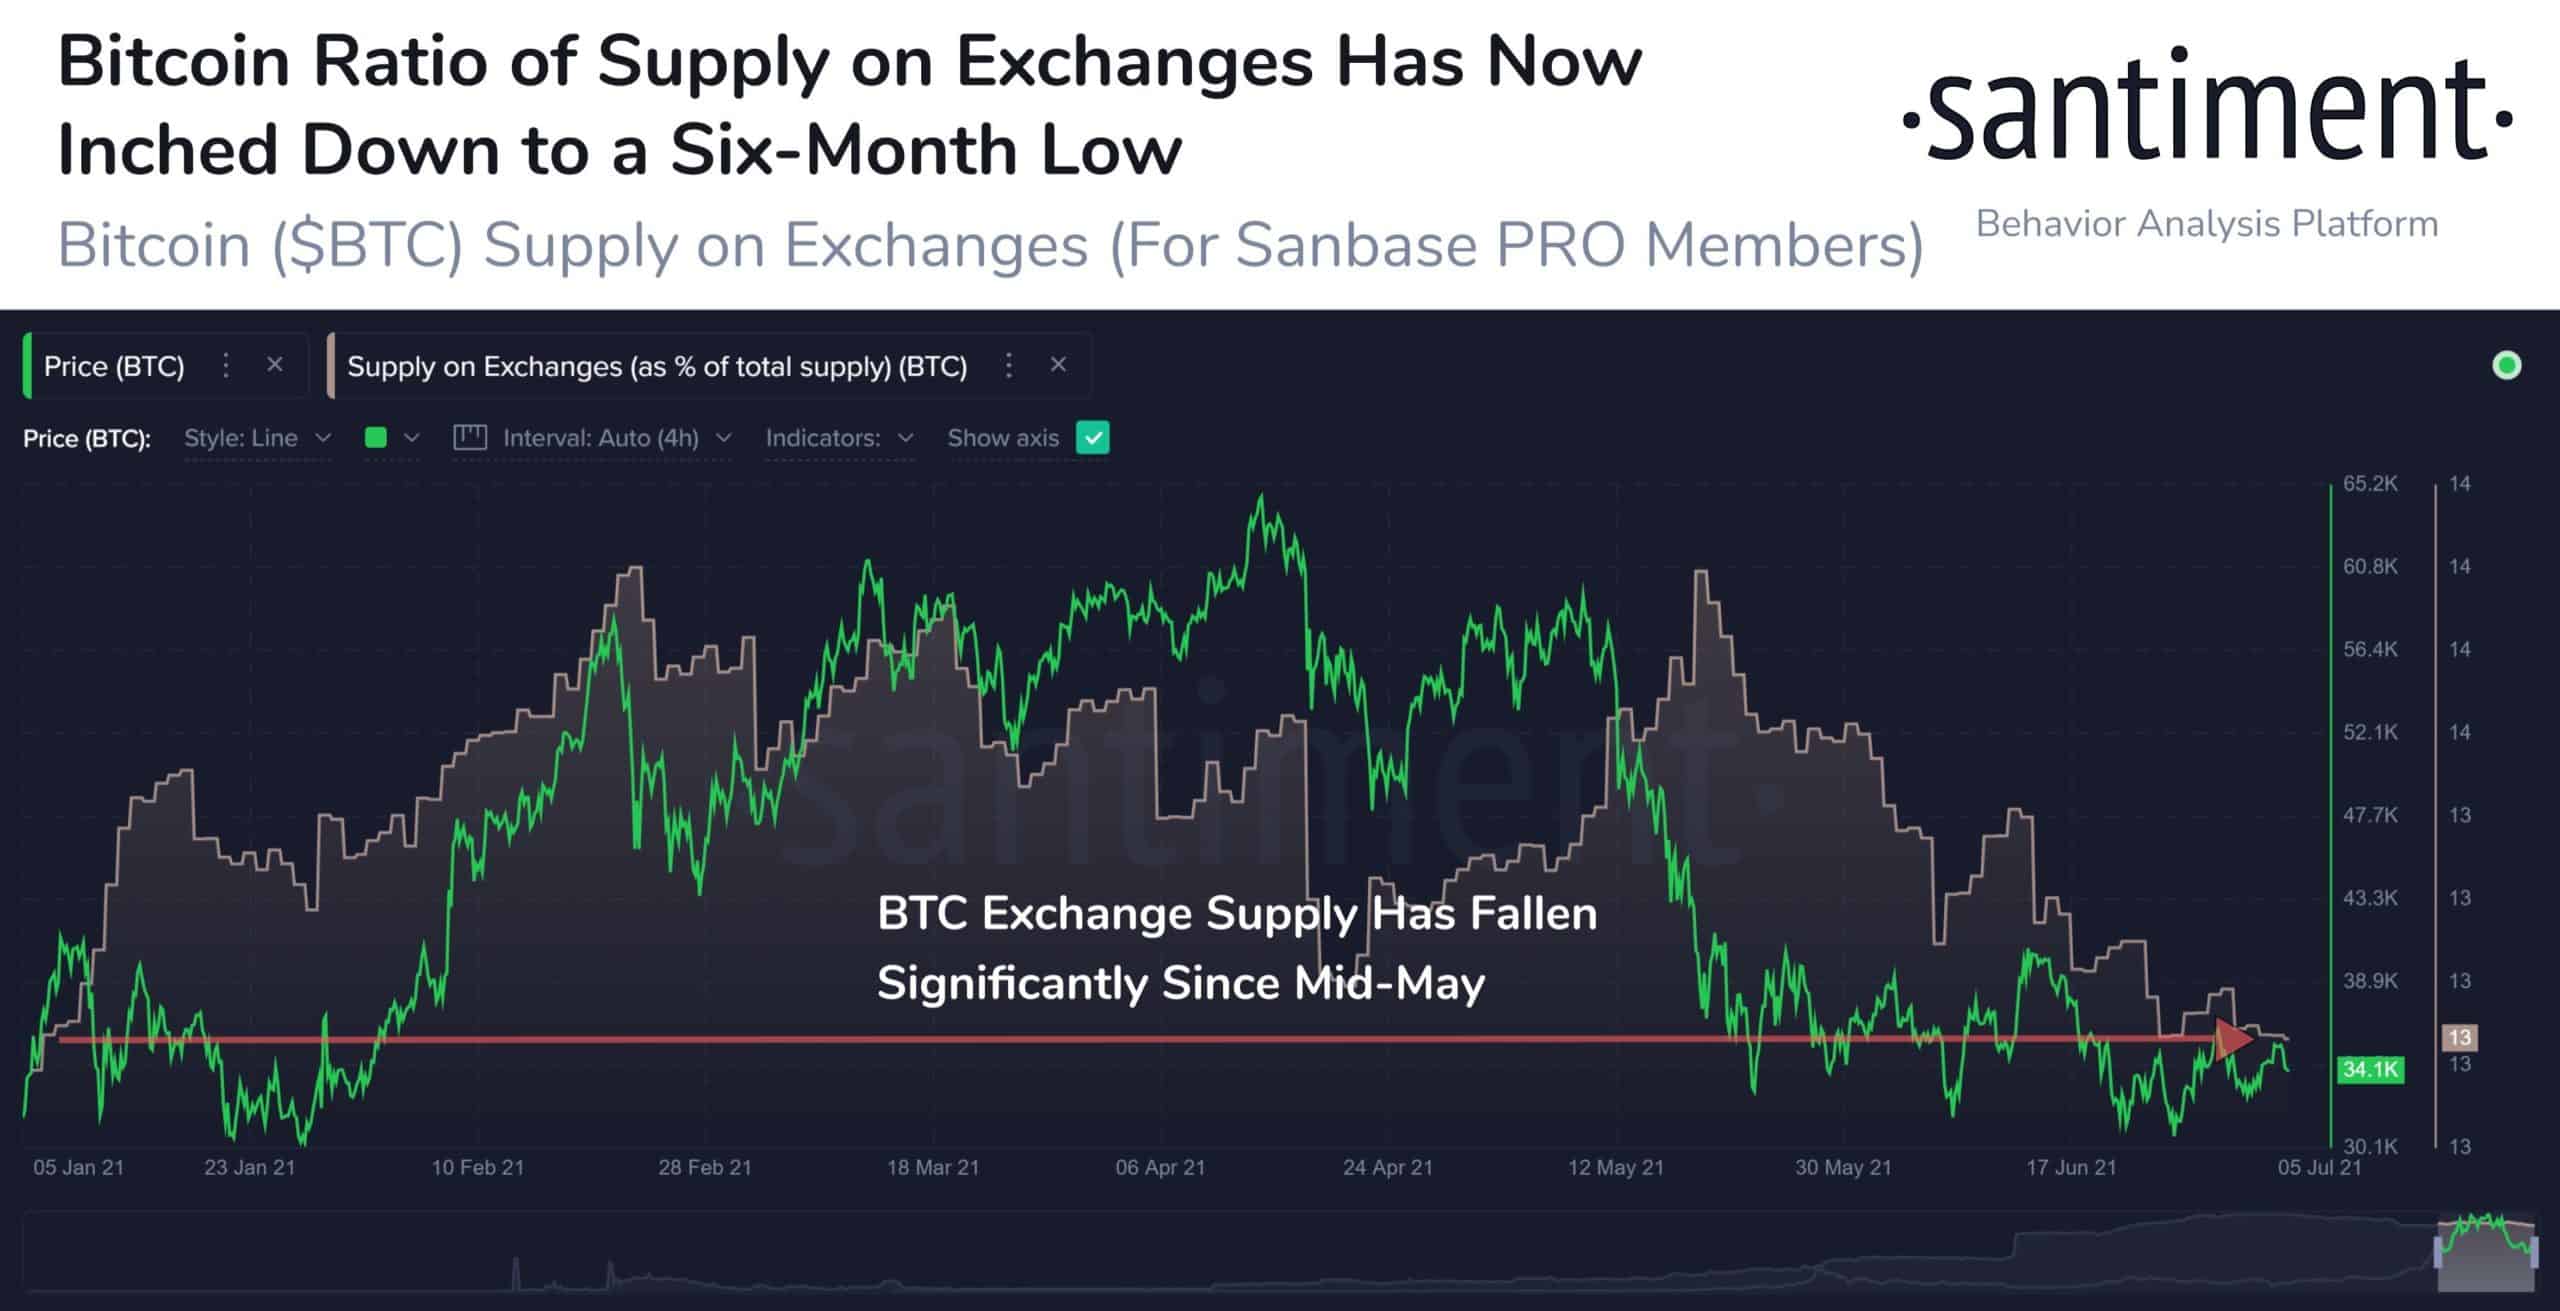 Bitcoin Stored on Exchanges. Source: Santiment